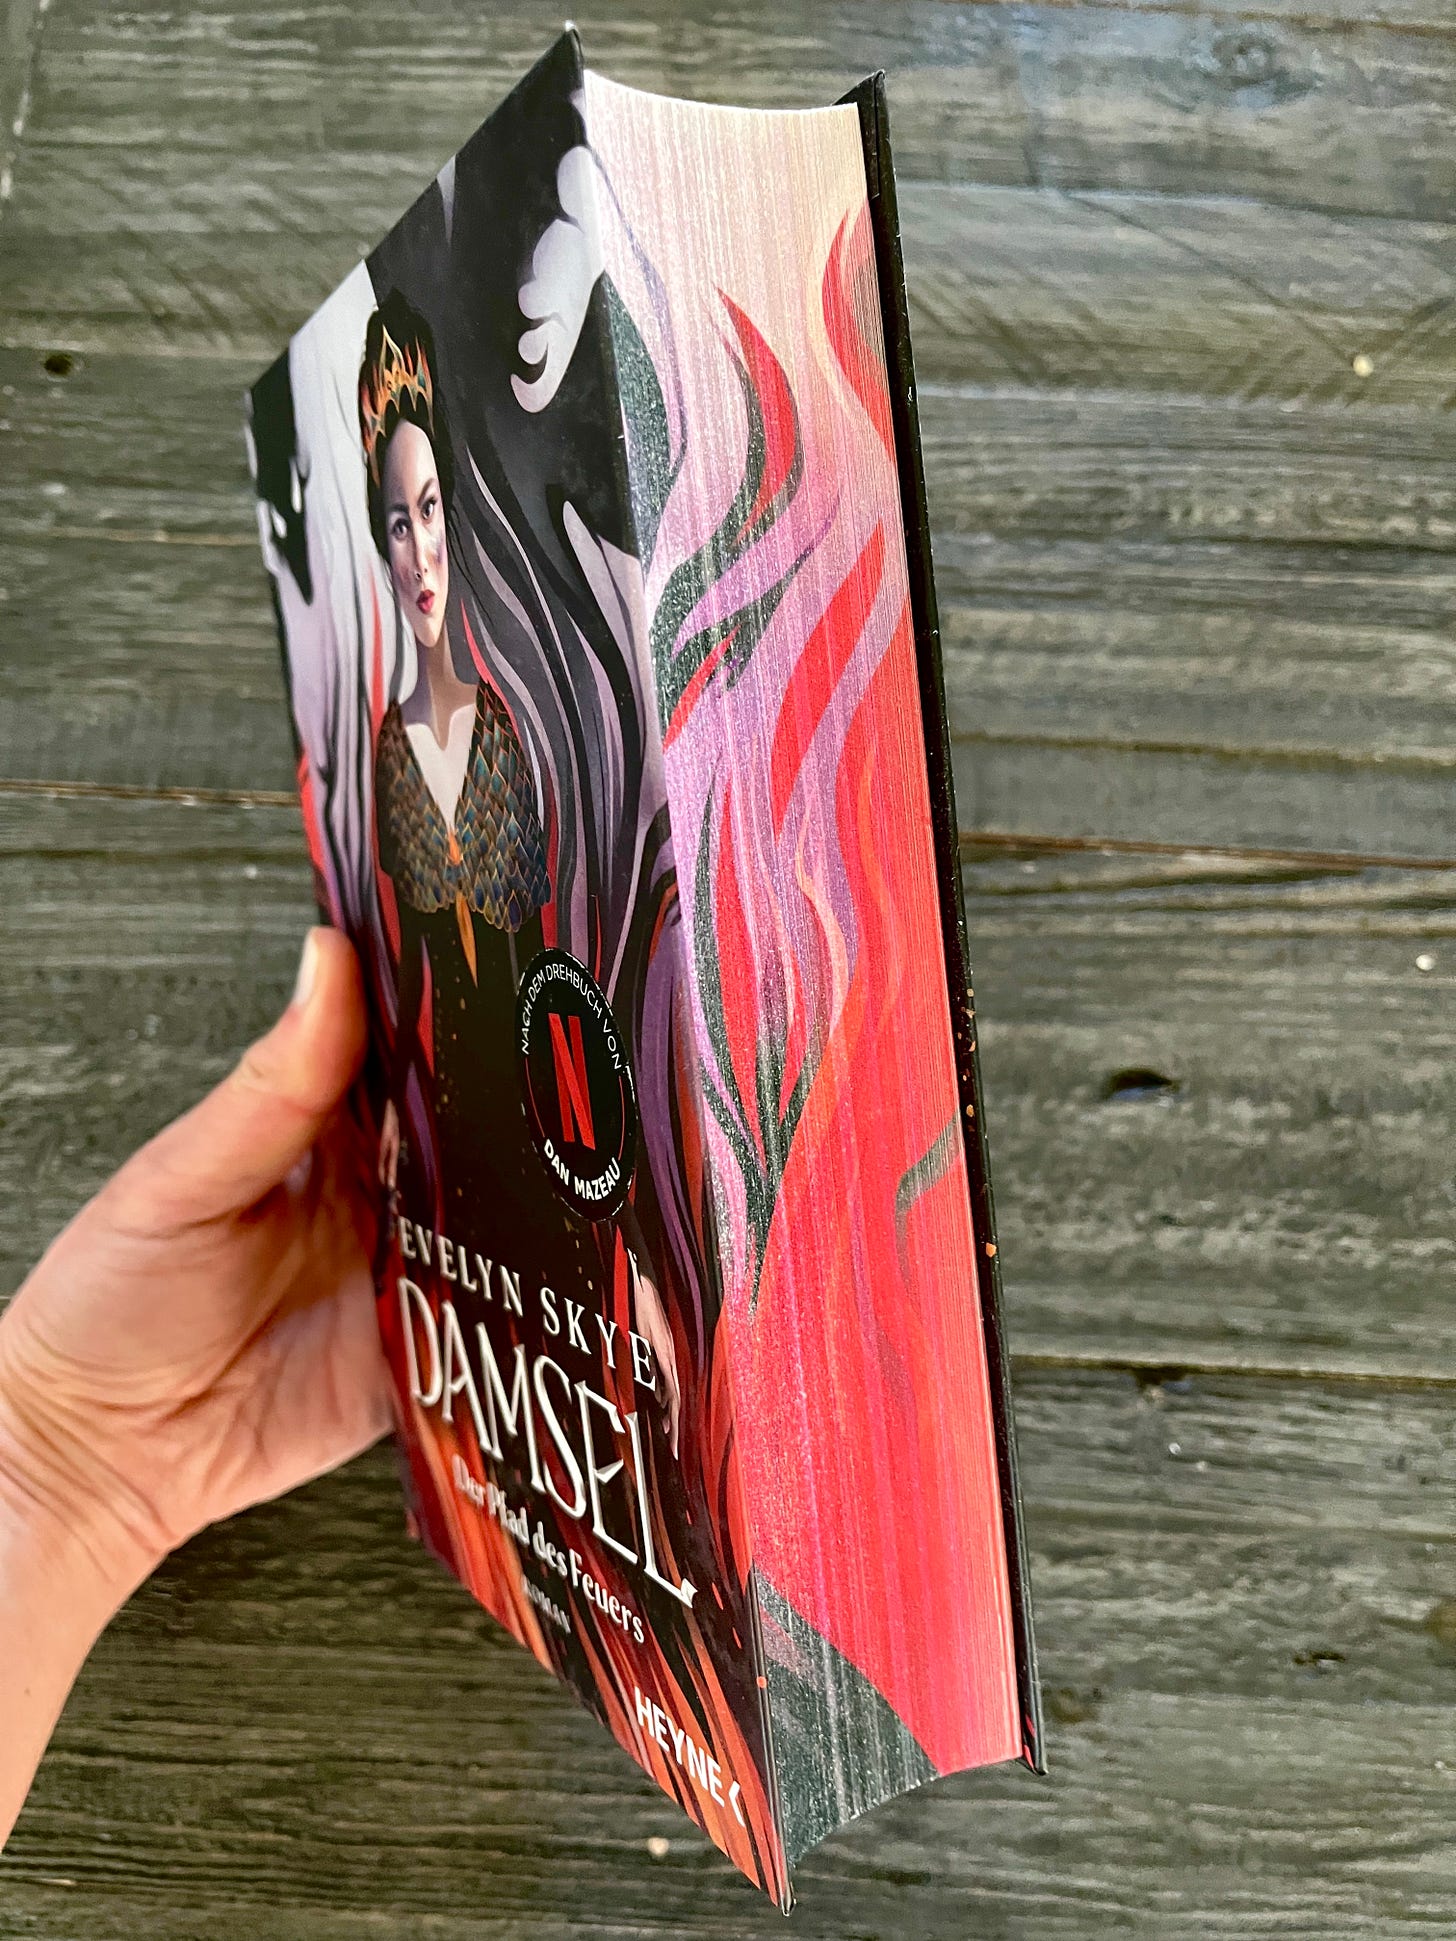 German edition of DAMSEL by Evelyn Skye, with painted edges like dragon fire